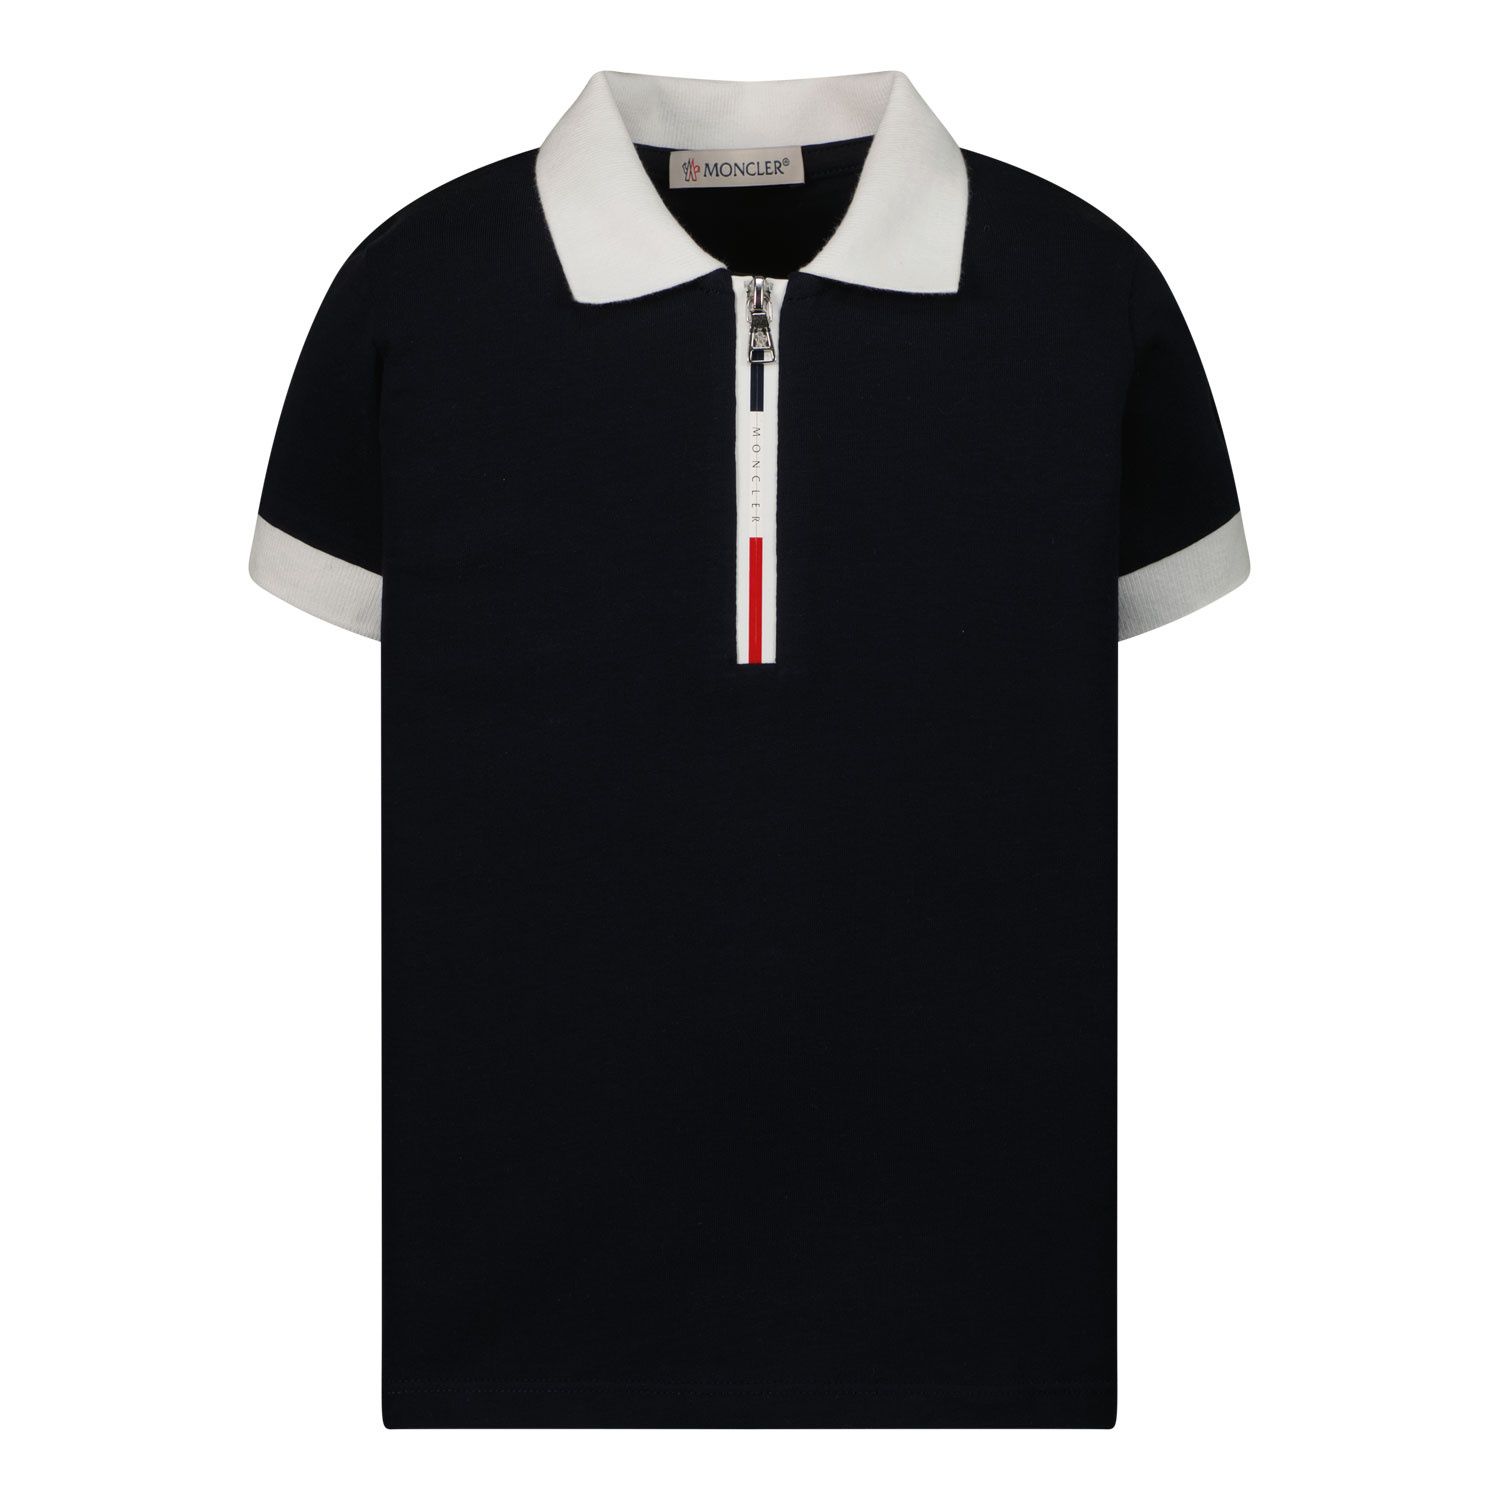 Picture of Moncler 8A00003 baby poloshirt navy